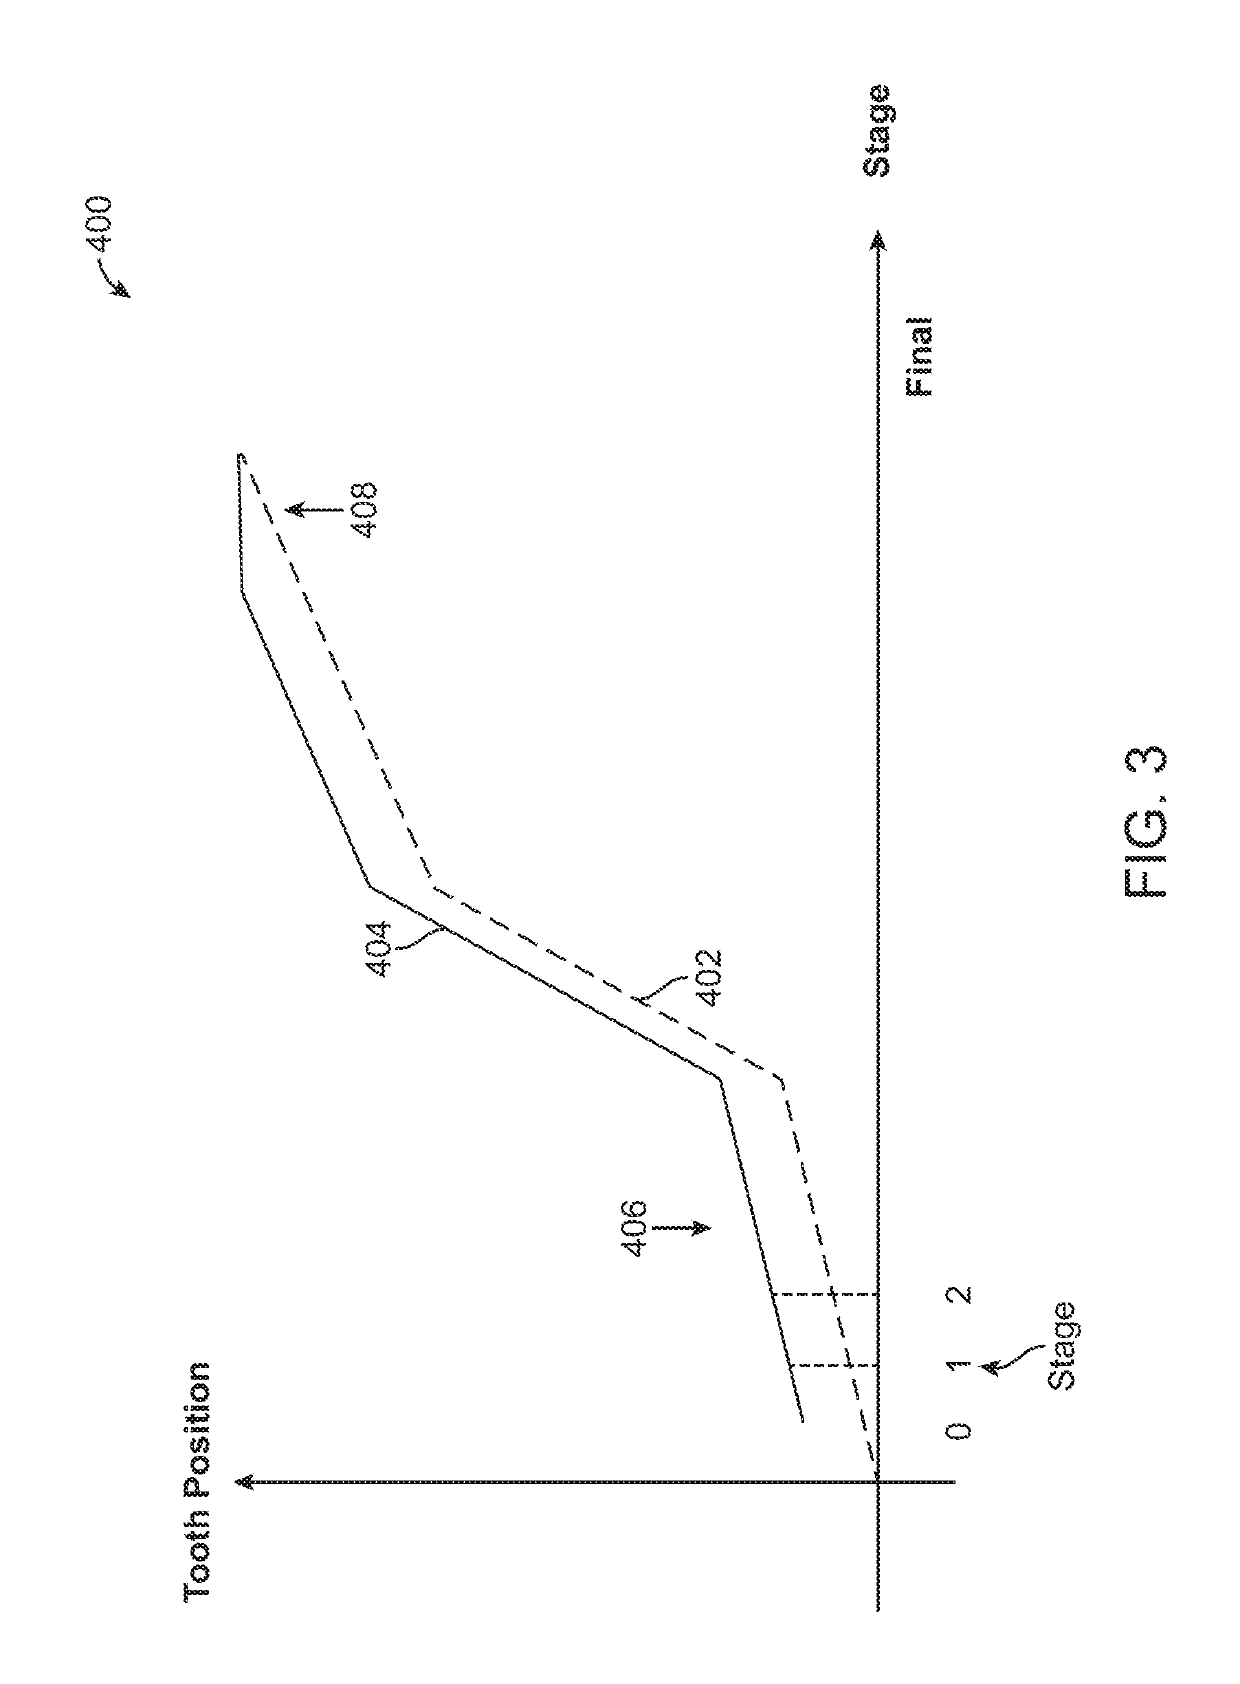 Method to visualize and manufacture aligner by modifying tooth position